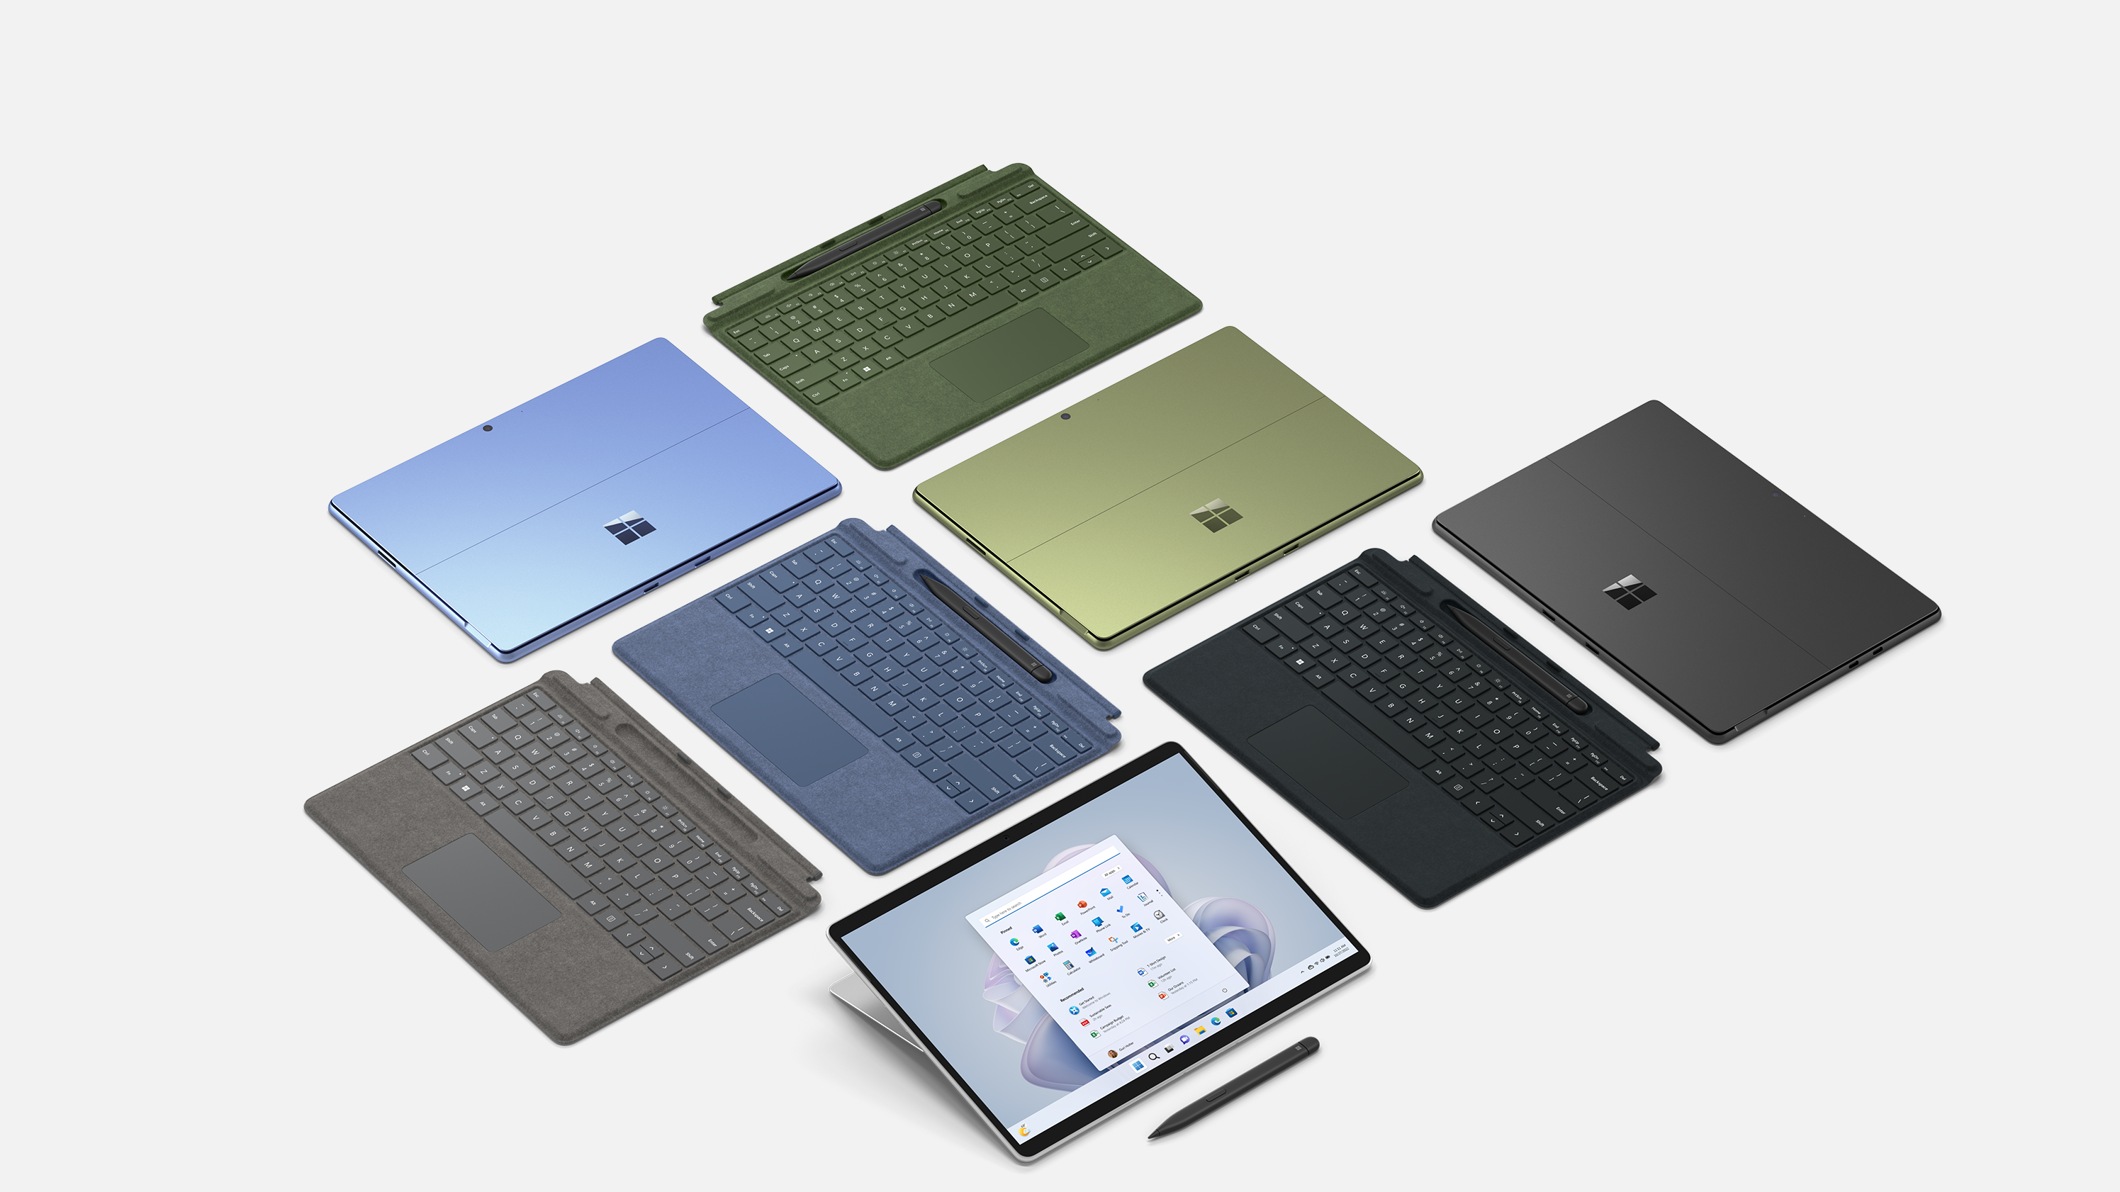 Surface Pro Signature Keyboard with Slim Pen 2 devices in a variety of colors.